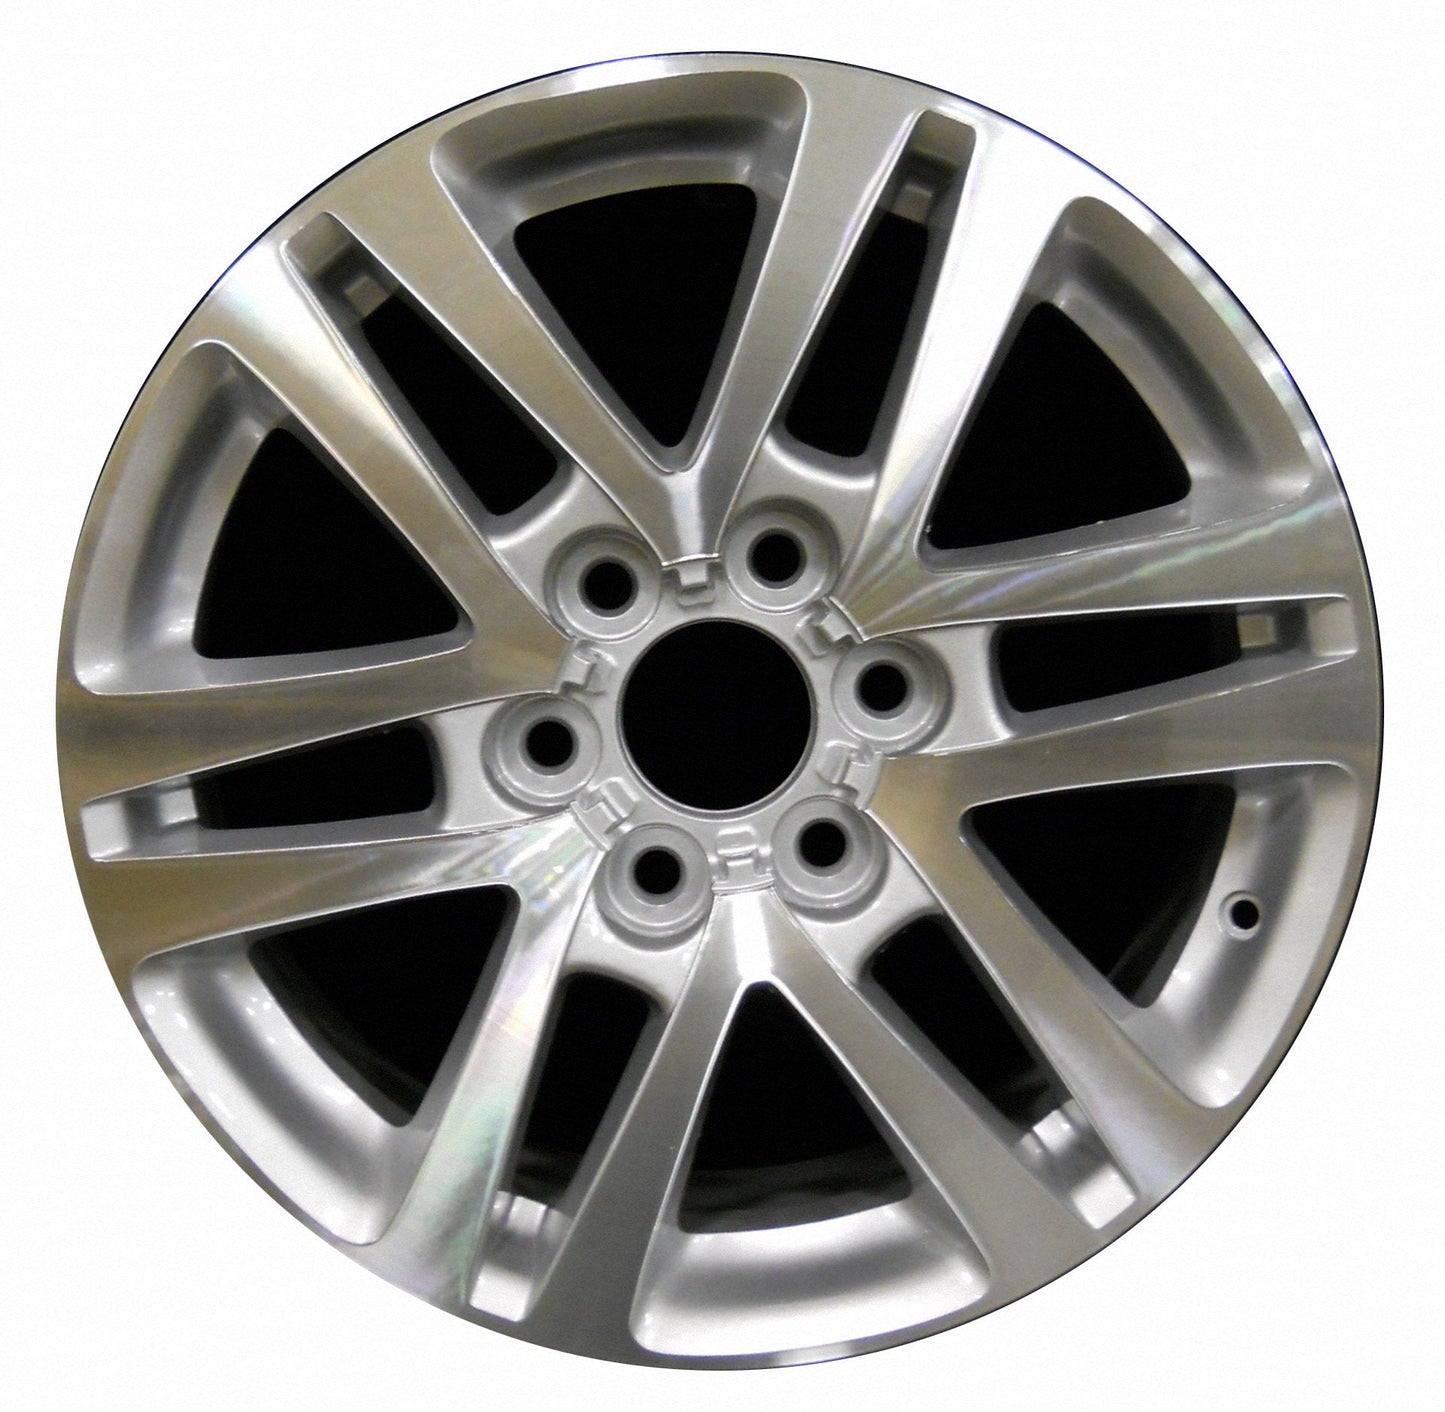 Buick Enclave  2008, 2009, 2010, 2011, 2012, 2013, 2014, 2015, 2016 Factory OEM Car Wheel Size 18x7.5 Alloy WAO.4076.PS09.MA